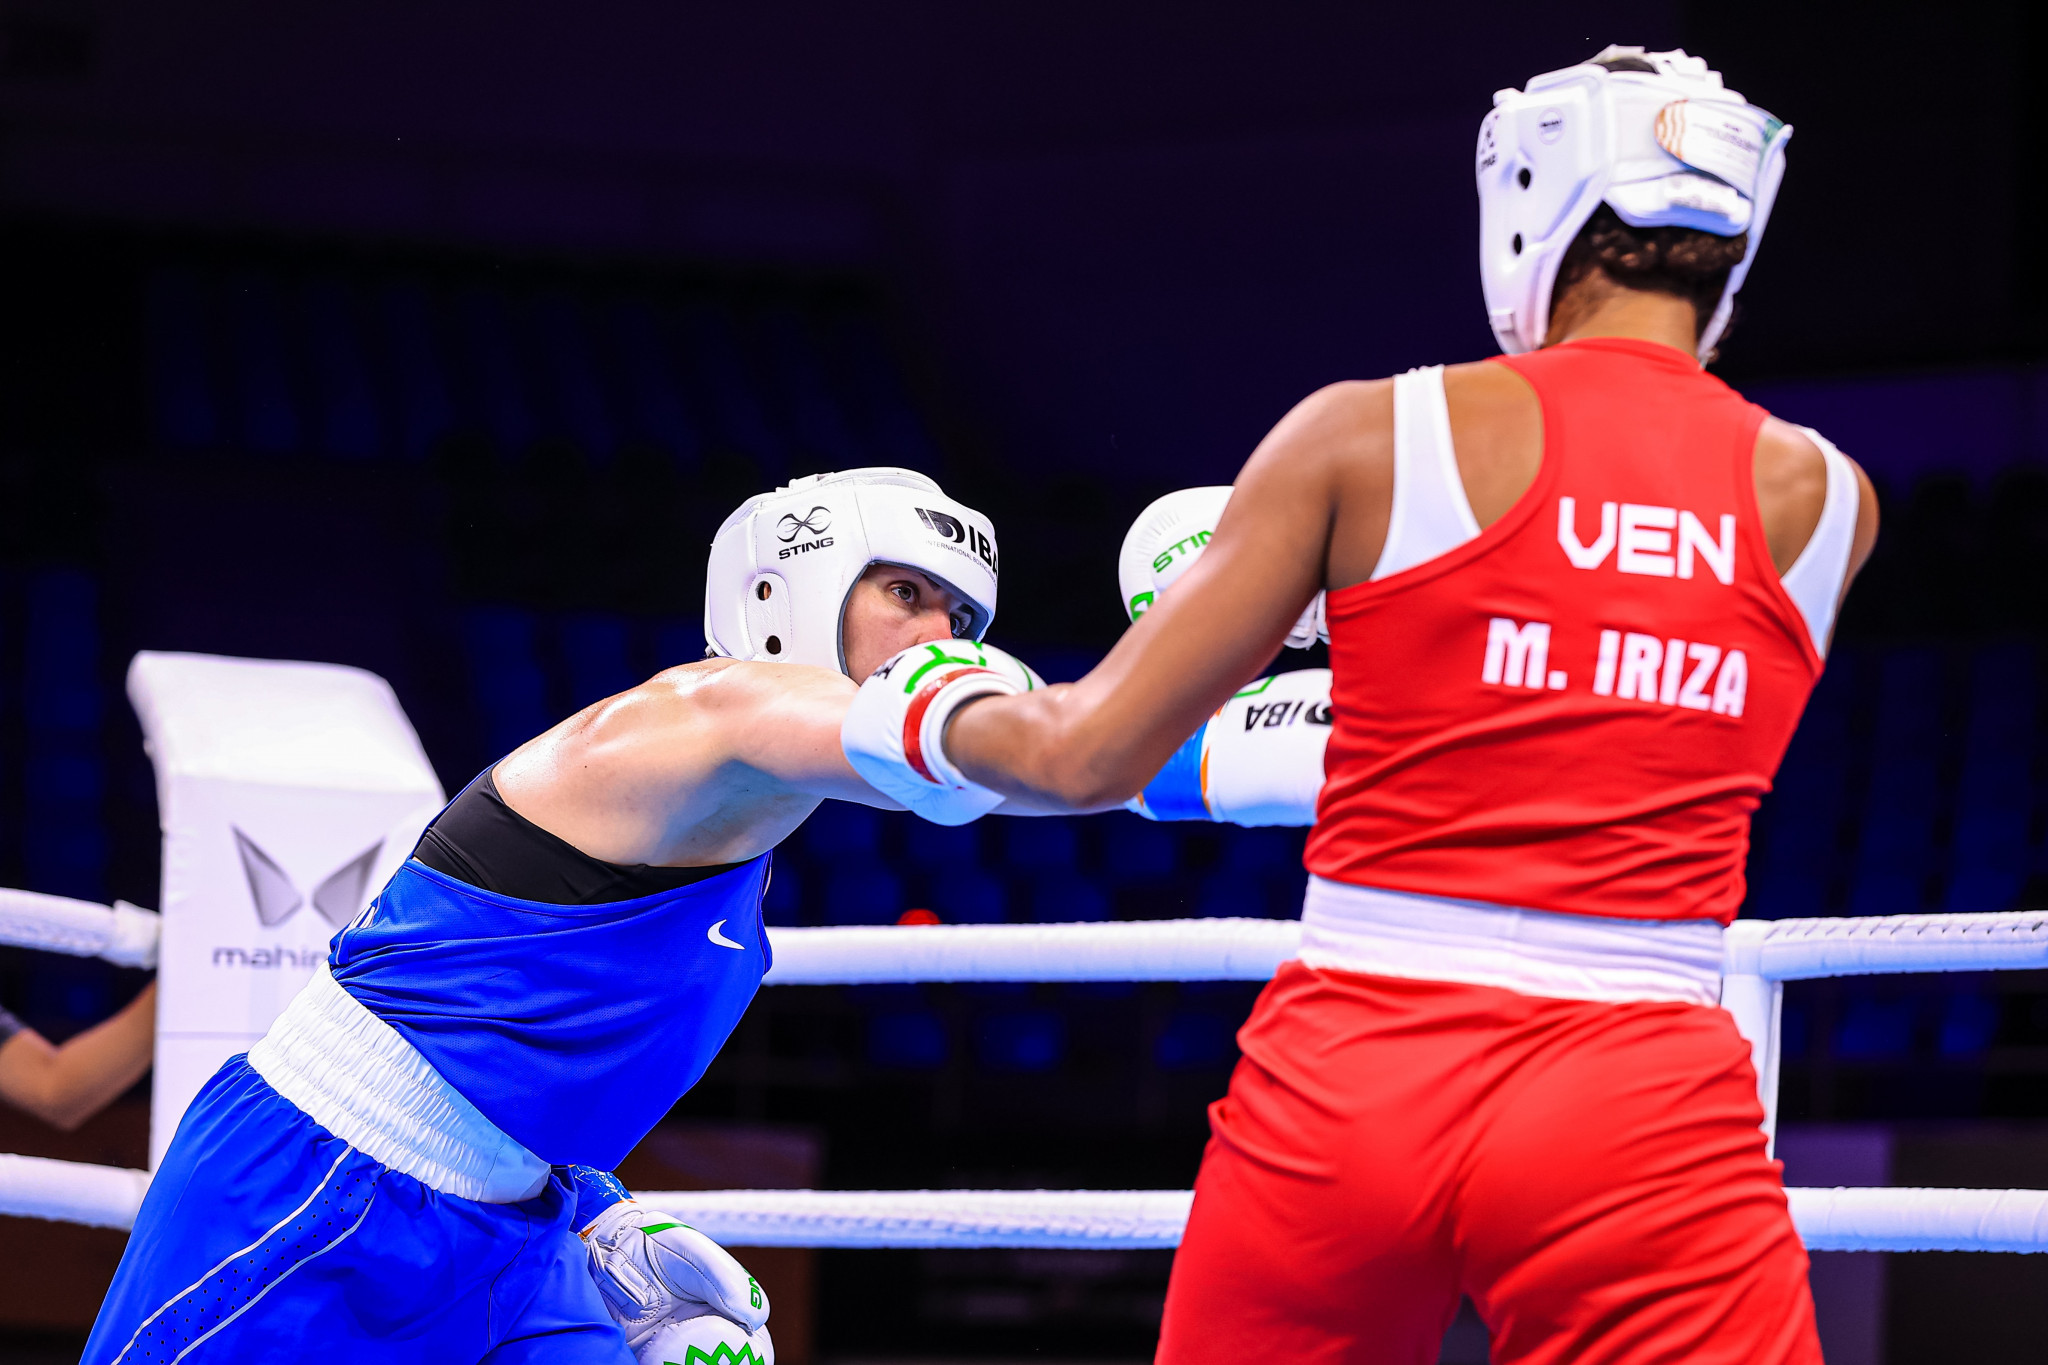 IBA says aid provided to more than 20 nations to fight at Women's World Championships